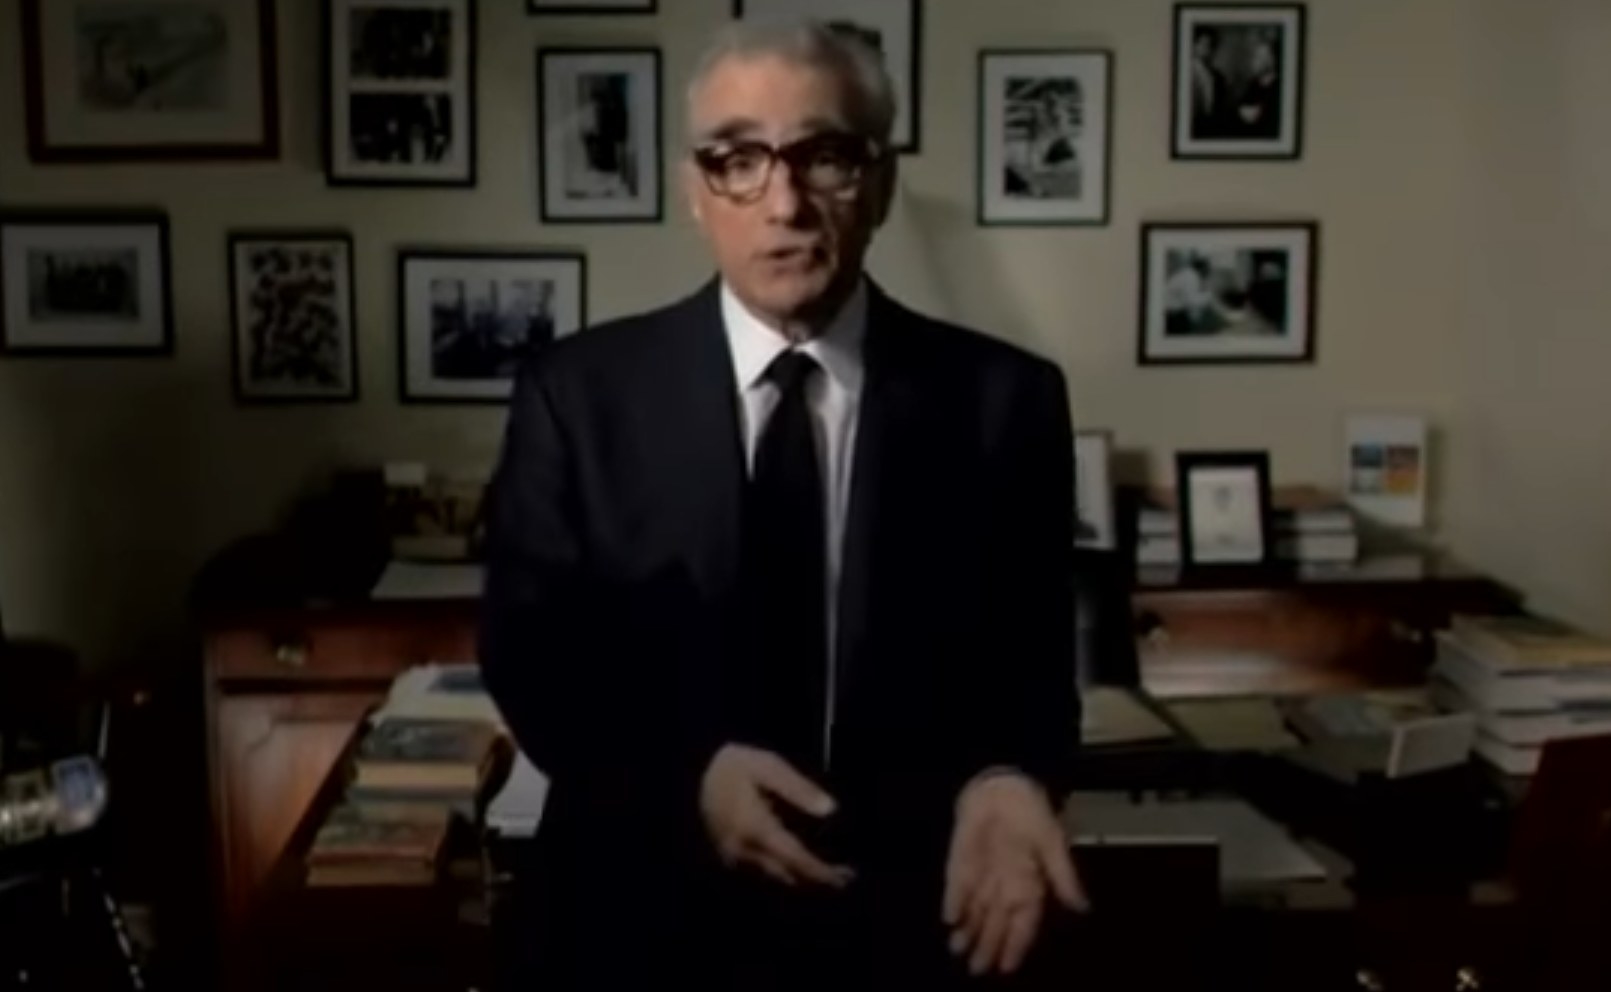 Martin Scorsese talks to the camera in an office